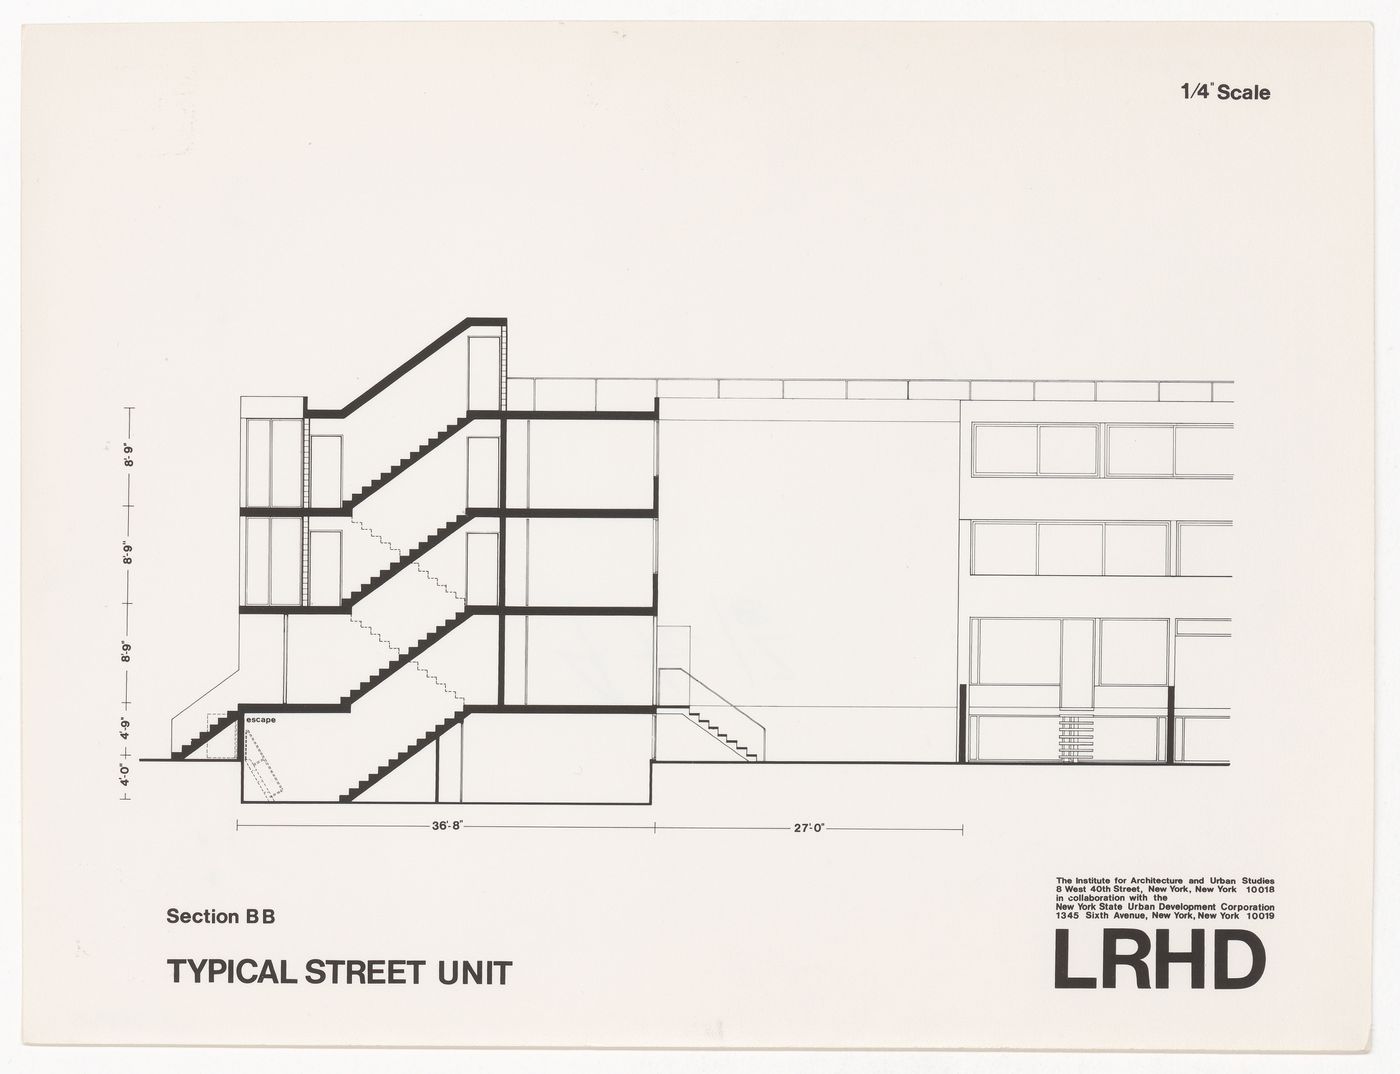 Section for typical street unit for the Low-Rise High-Density MoMA exhibition